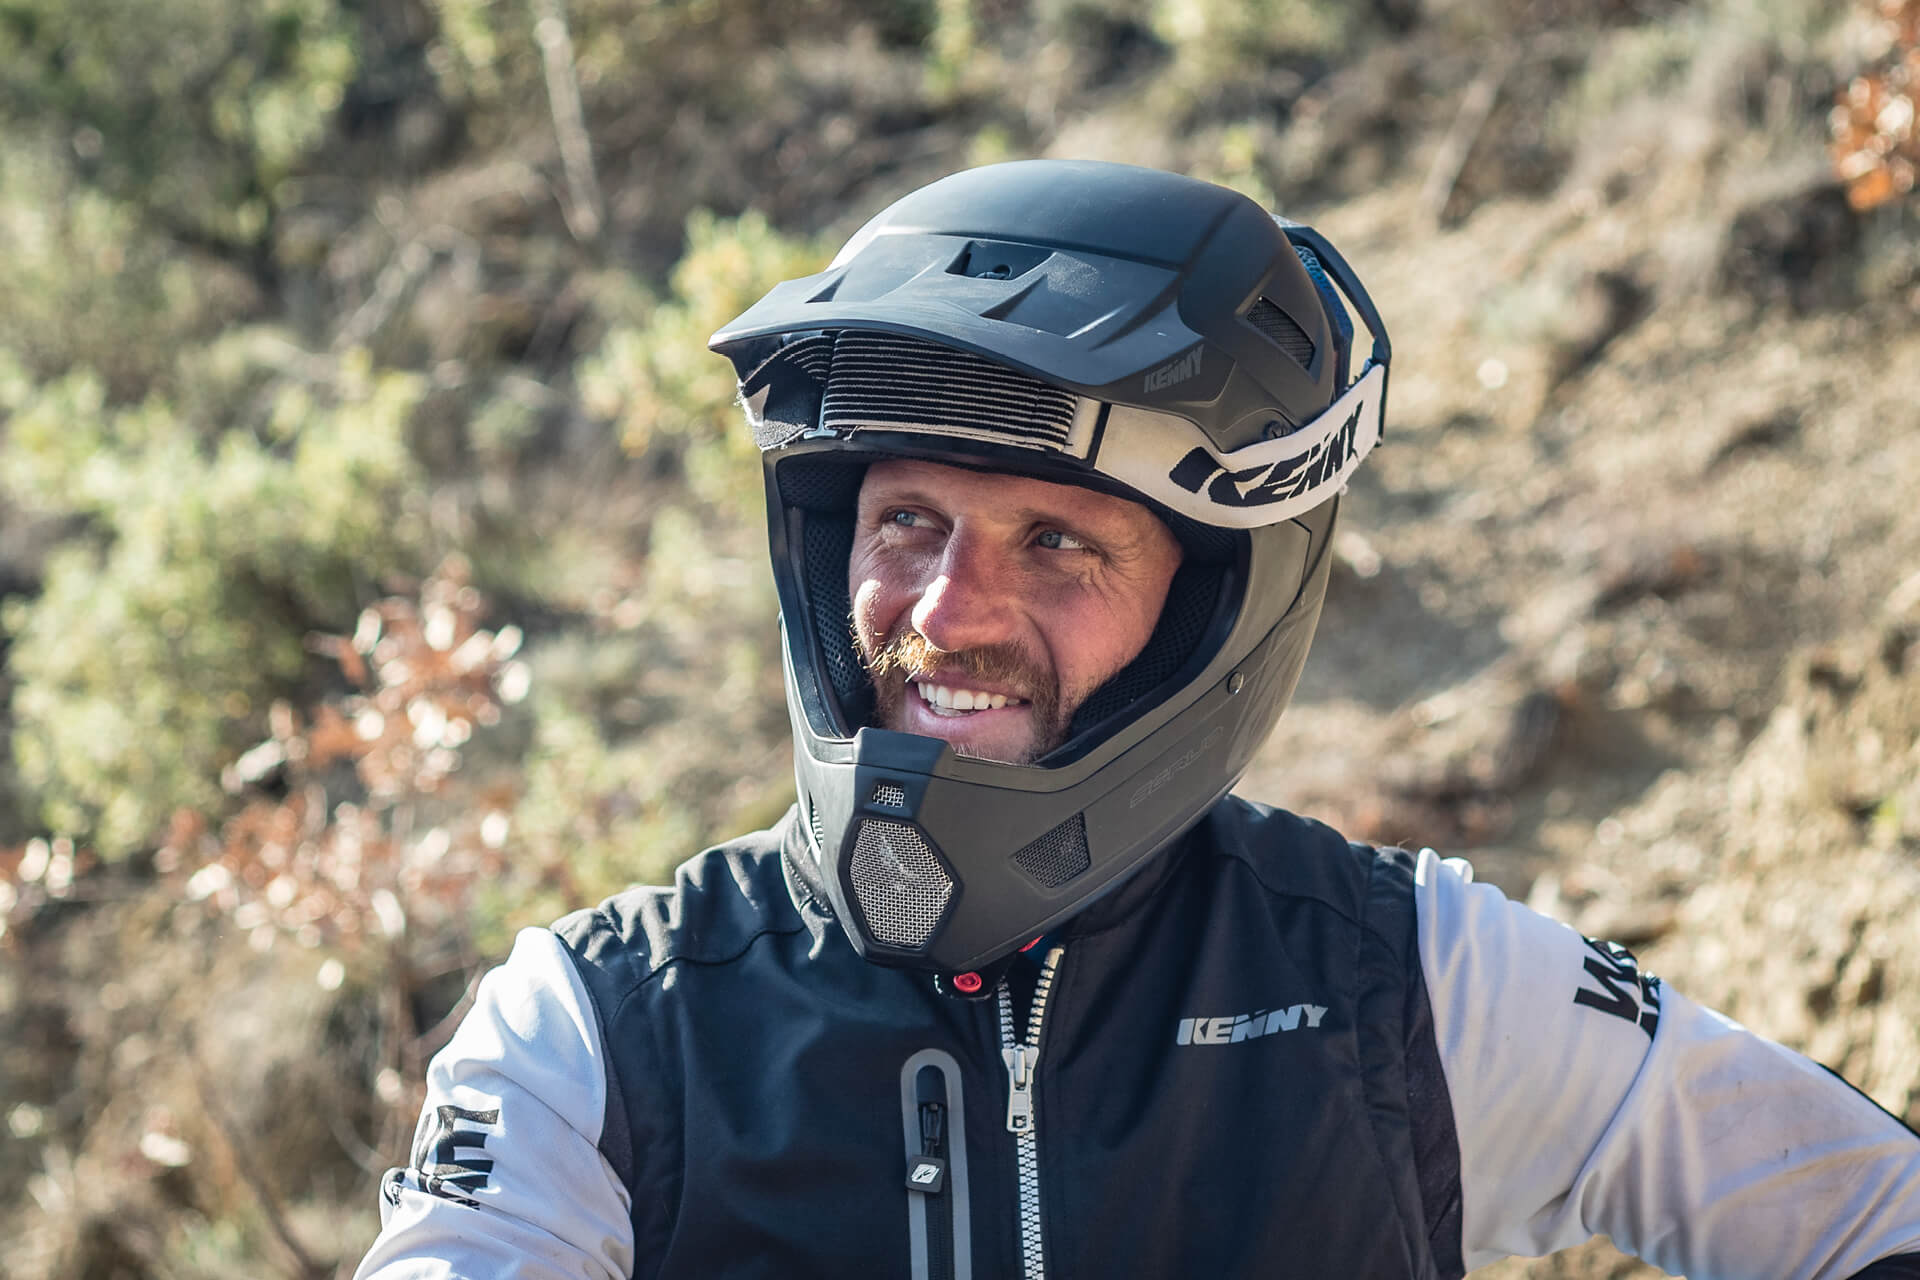 Close up Haibike Hero Xavier Marovelli smiling with a helmet on